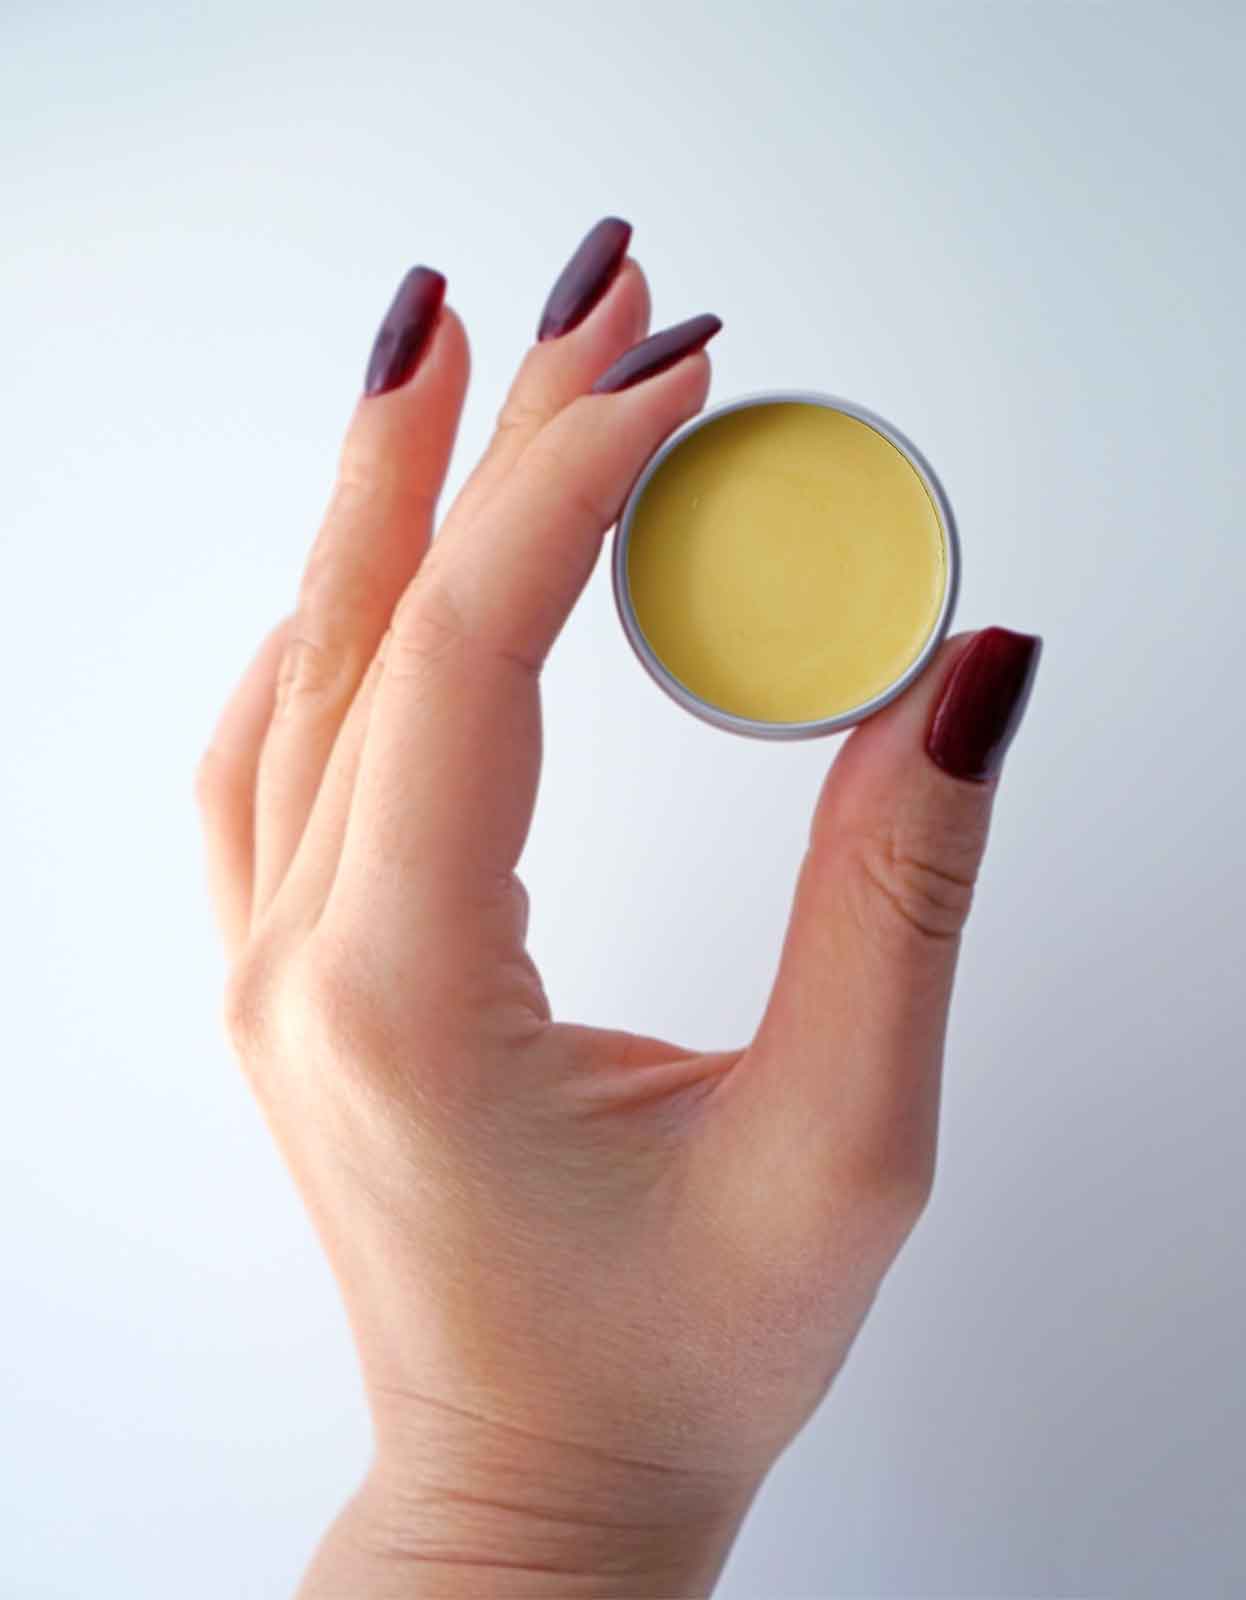 An open container of ghee lip balm made from Pure Indian Foods grass-fed ghee.